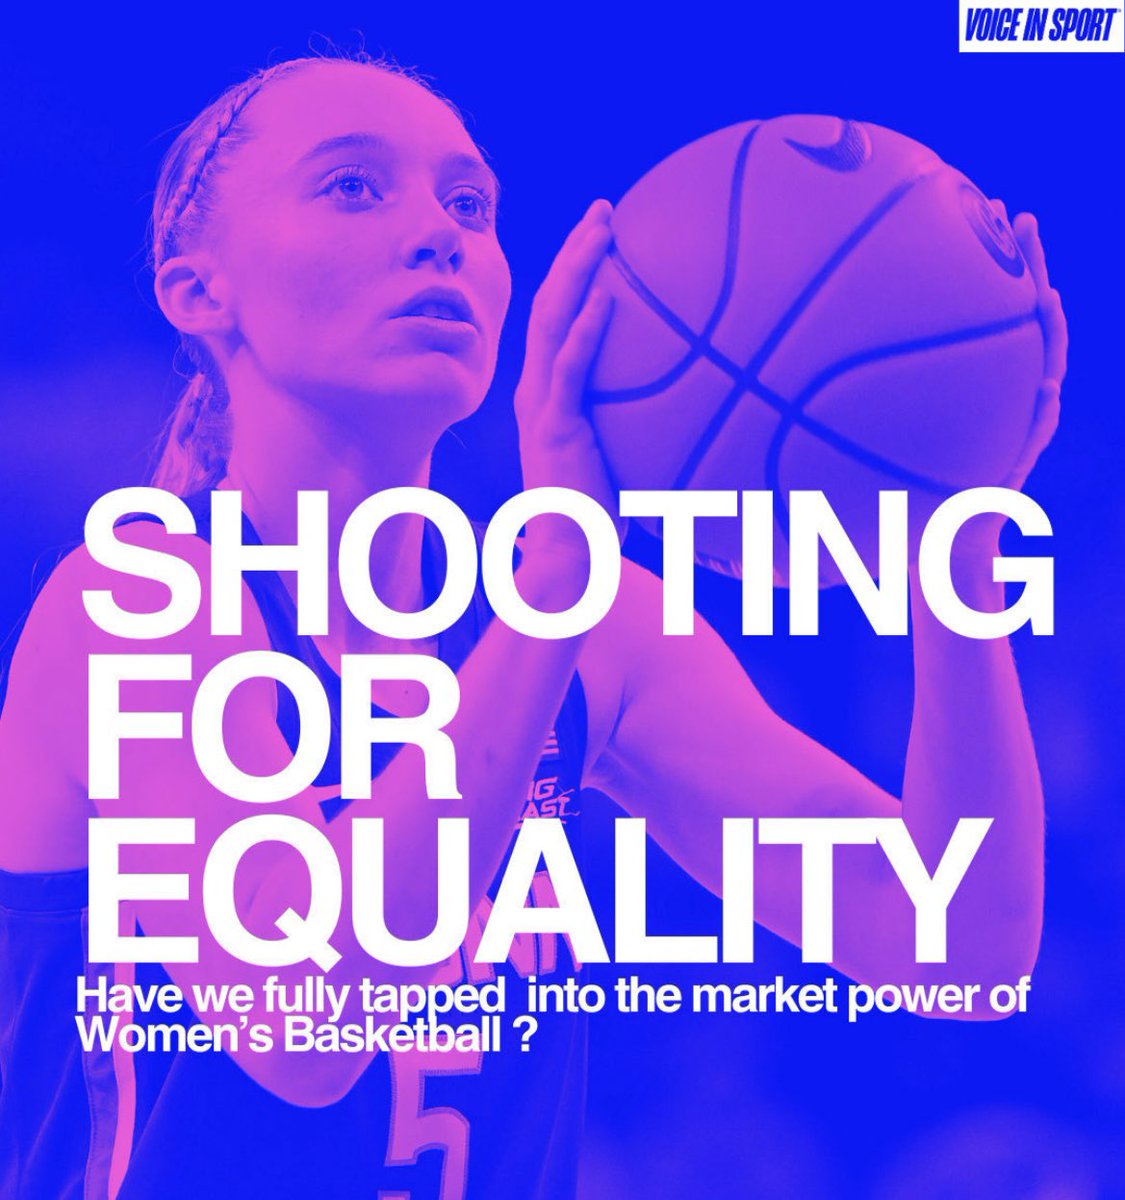 As recognition for Women’s March Madness continues to grow, what is next for college basketball? Read more about the record breaking season and how it impacts the future of women’s sports 🏀 #WomenInSports #NCAA #MarchMadness #VoiceInSport #moreVIS voiceinsport.com/post/advocacy/…